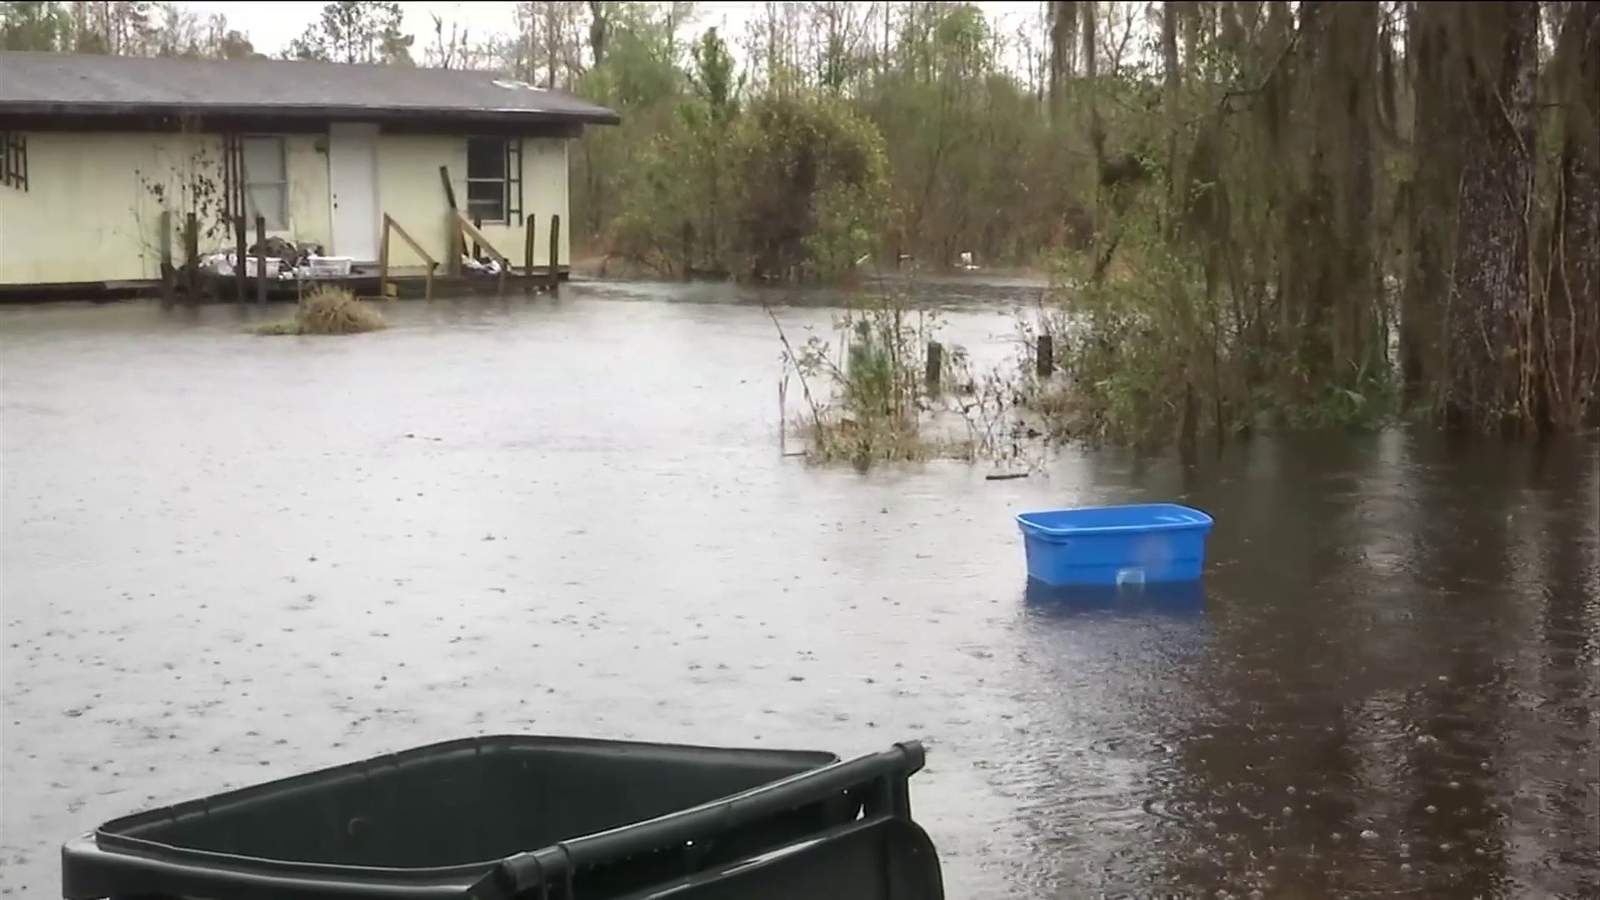 Glynn County residents impatient after intense flooding spurs evacuations